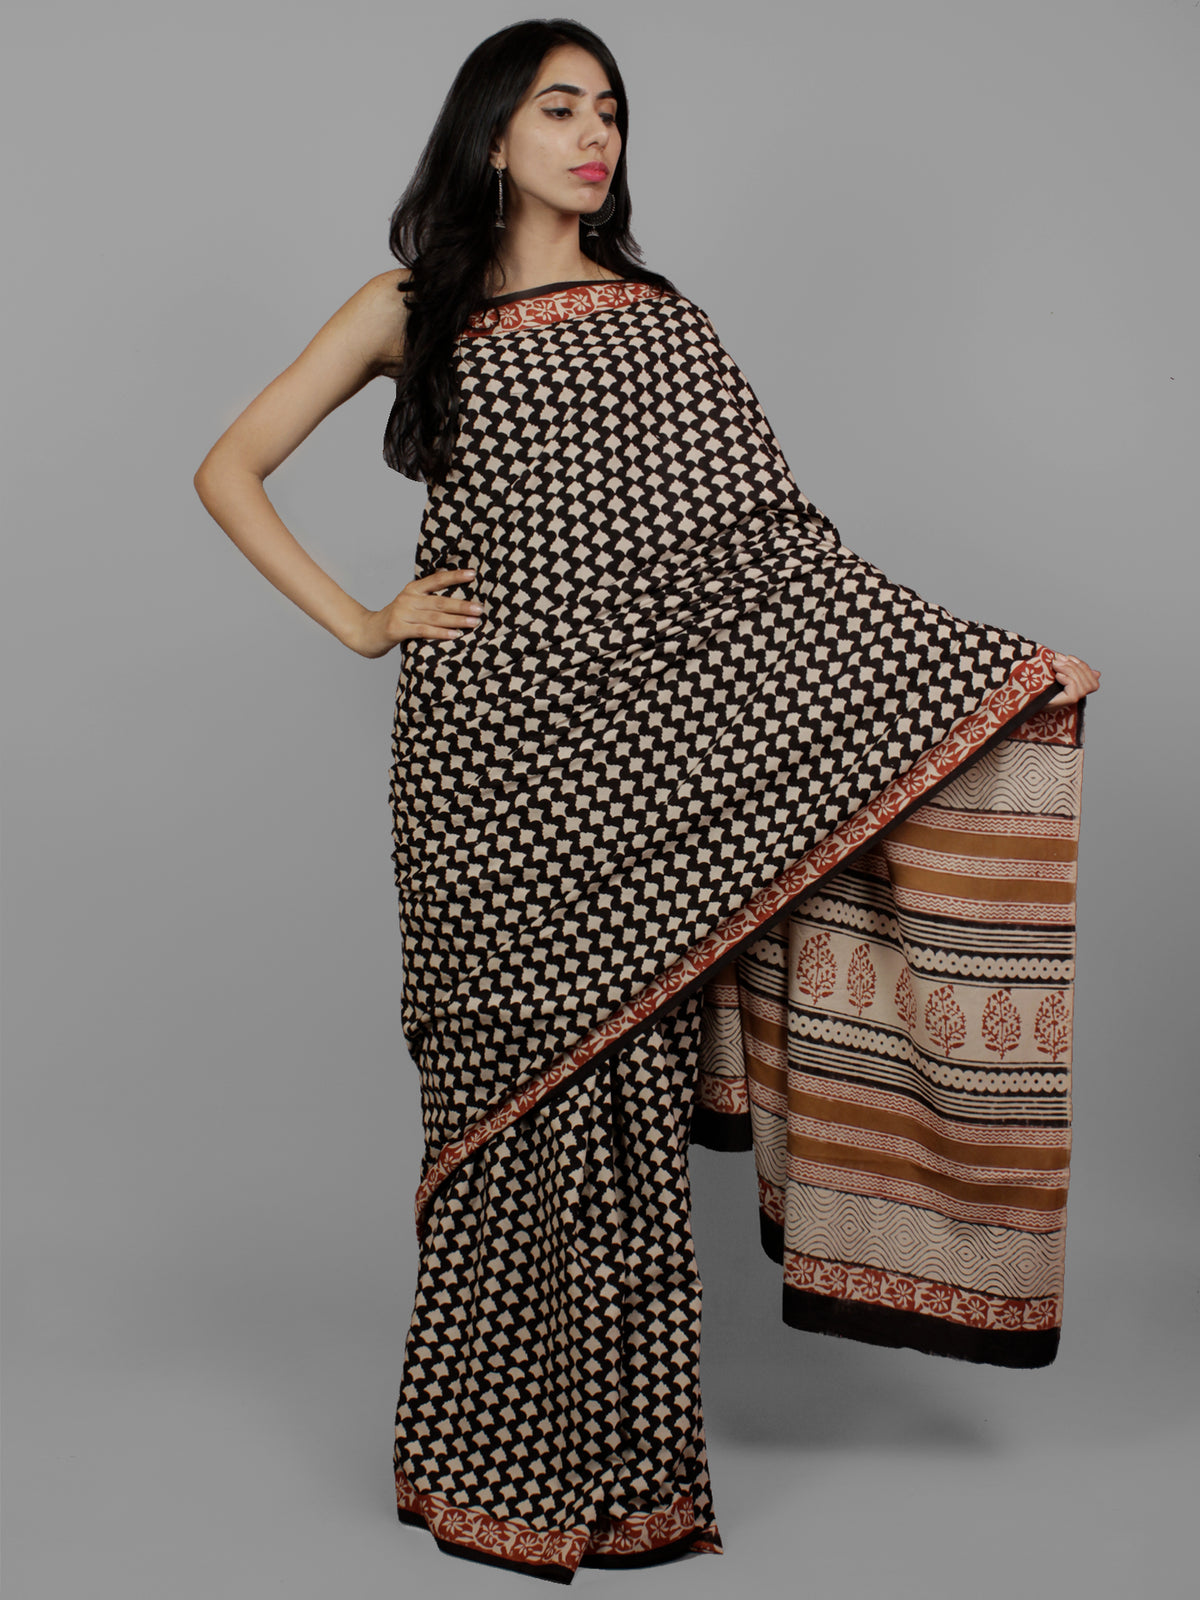 Black Beige Maroon Cotton Hand Block Printed Saree in Natural Colors - S031702206